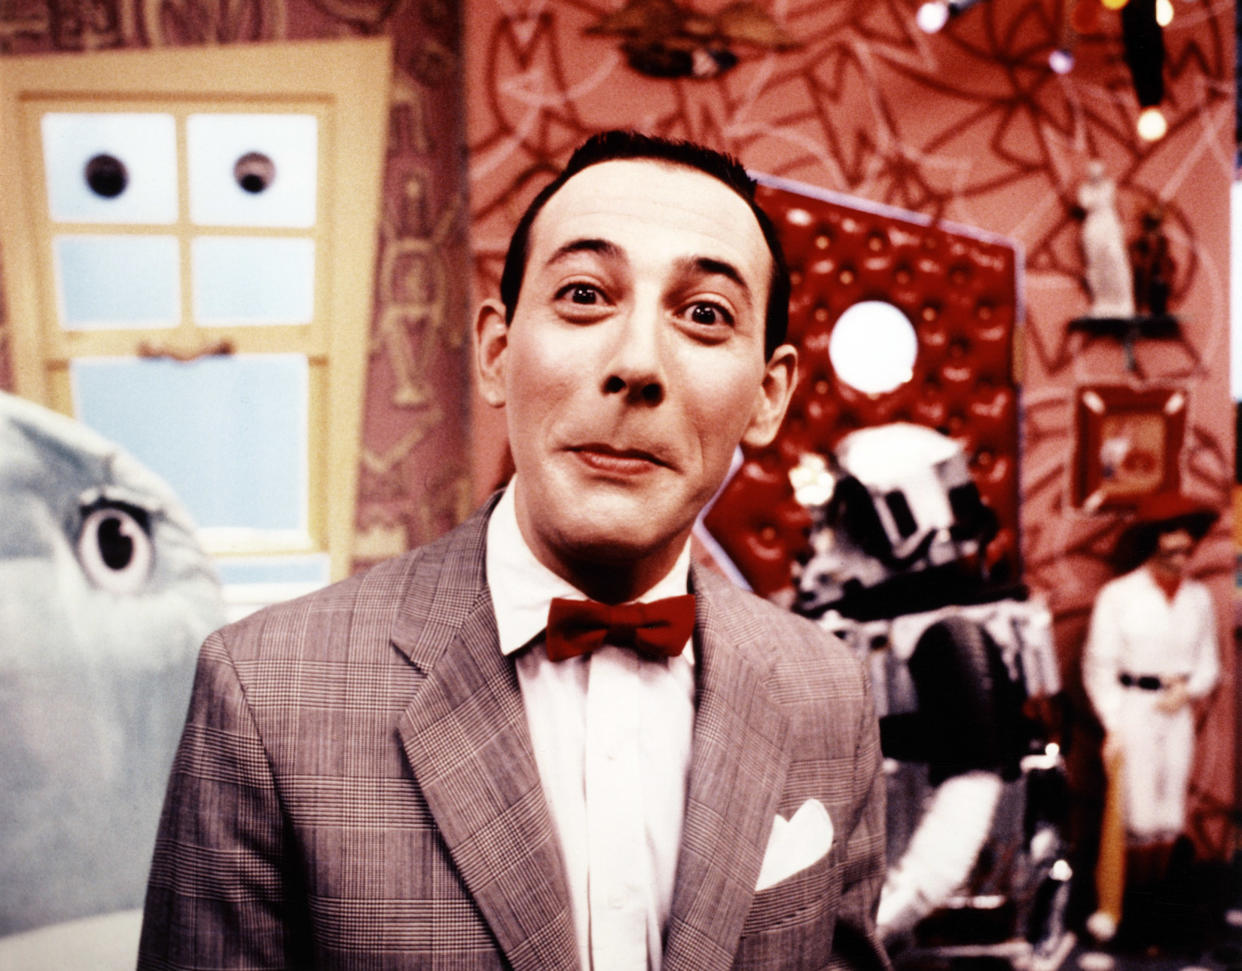 Paul Reubens as Pee-wee Herman on the set of Pee-wee's Playhouse. (Photo: CBS/Courtesy Everett Collection)